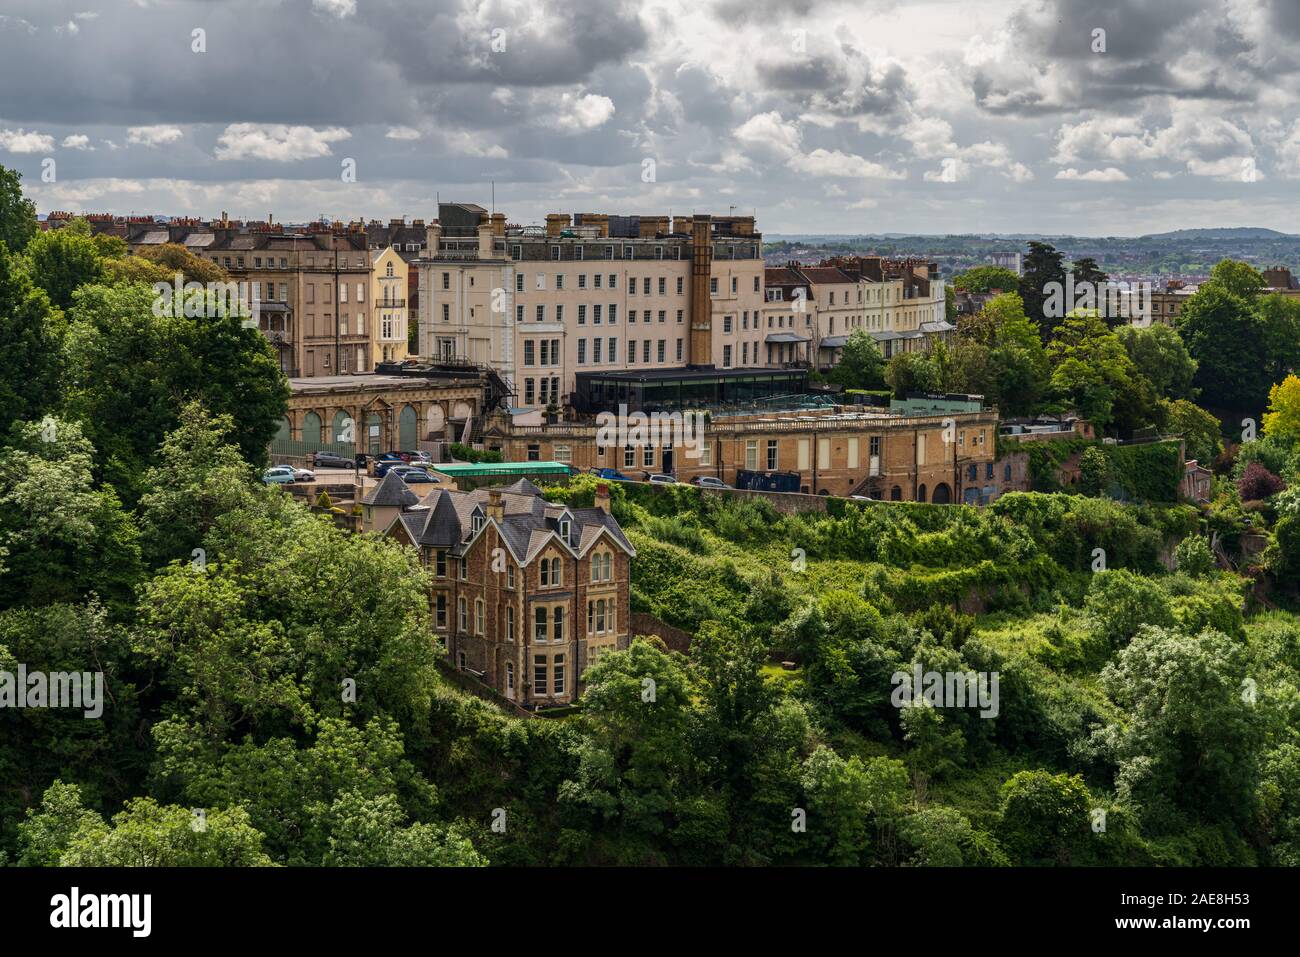 Bristol, England, UK - June 09, 2019: View from the Clifton Suspension Bridge, looking towards Clifton Village Stock Photo